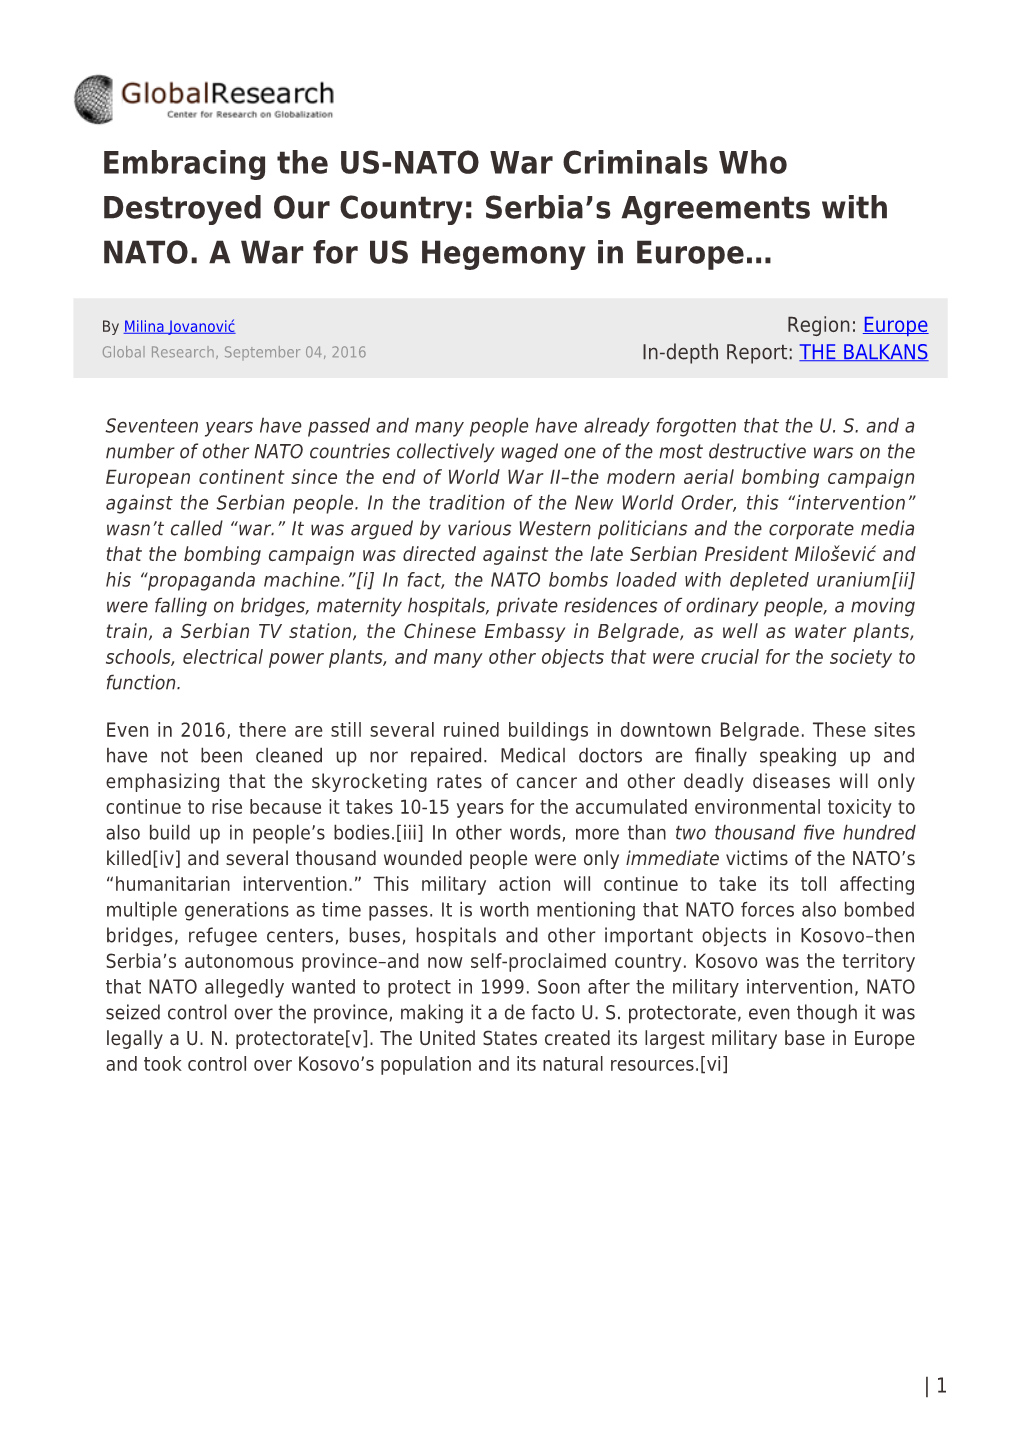 Embracing the US-NATO War Criminals Who Destroyed Our Country: Serbia’S Agreements with NATO